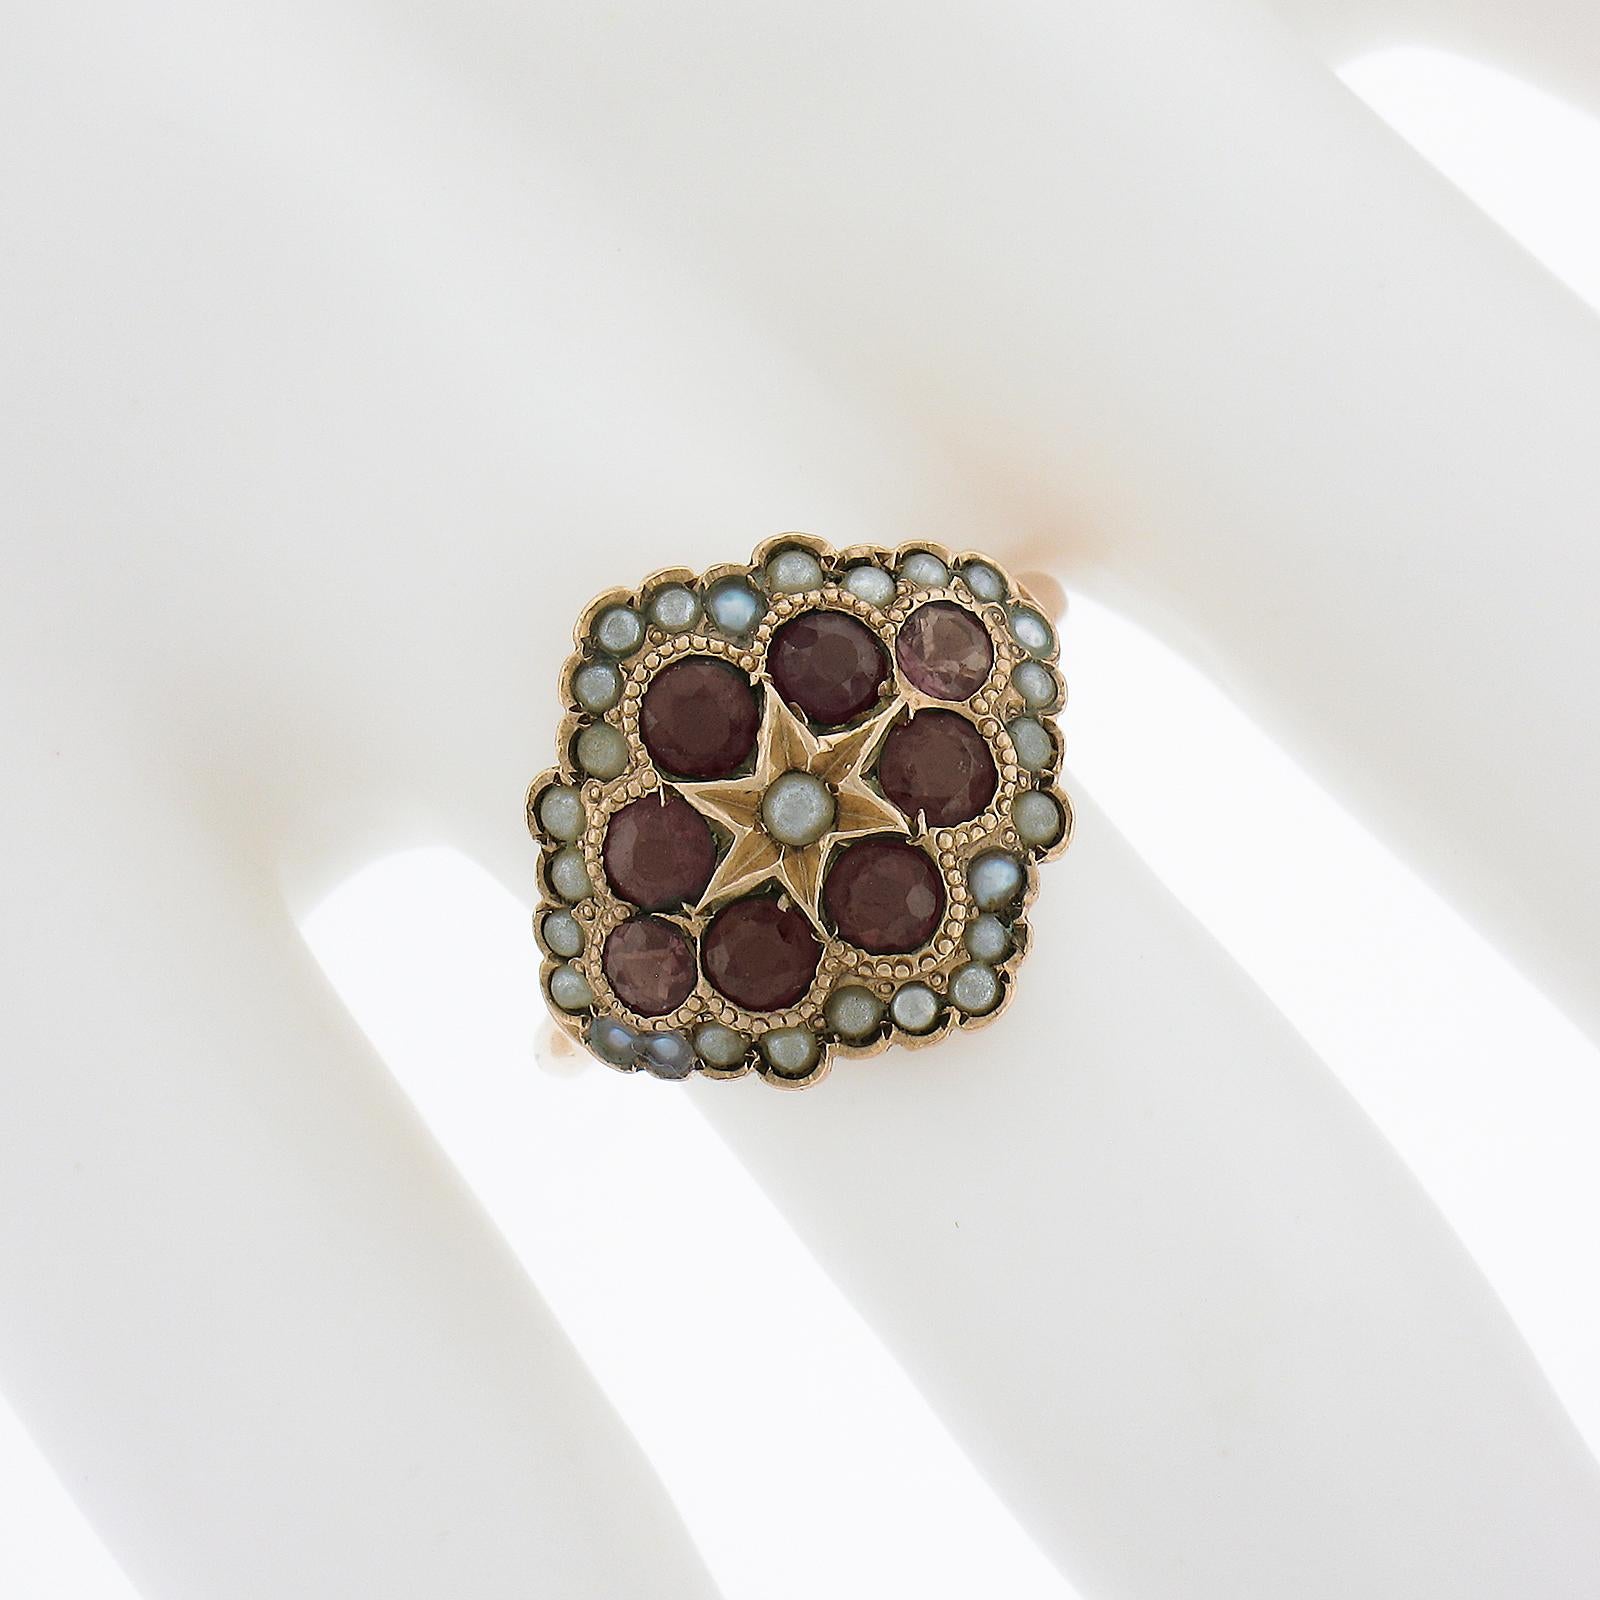 Antique Victorian 10k Rosy Yellow Gold Old Rhodolite Garnet & Seed Pearl Ring In Excellent Condition For Sale In Montclair, NJ